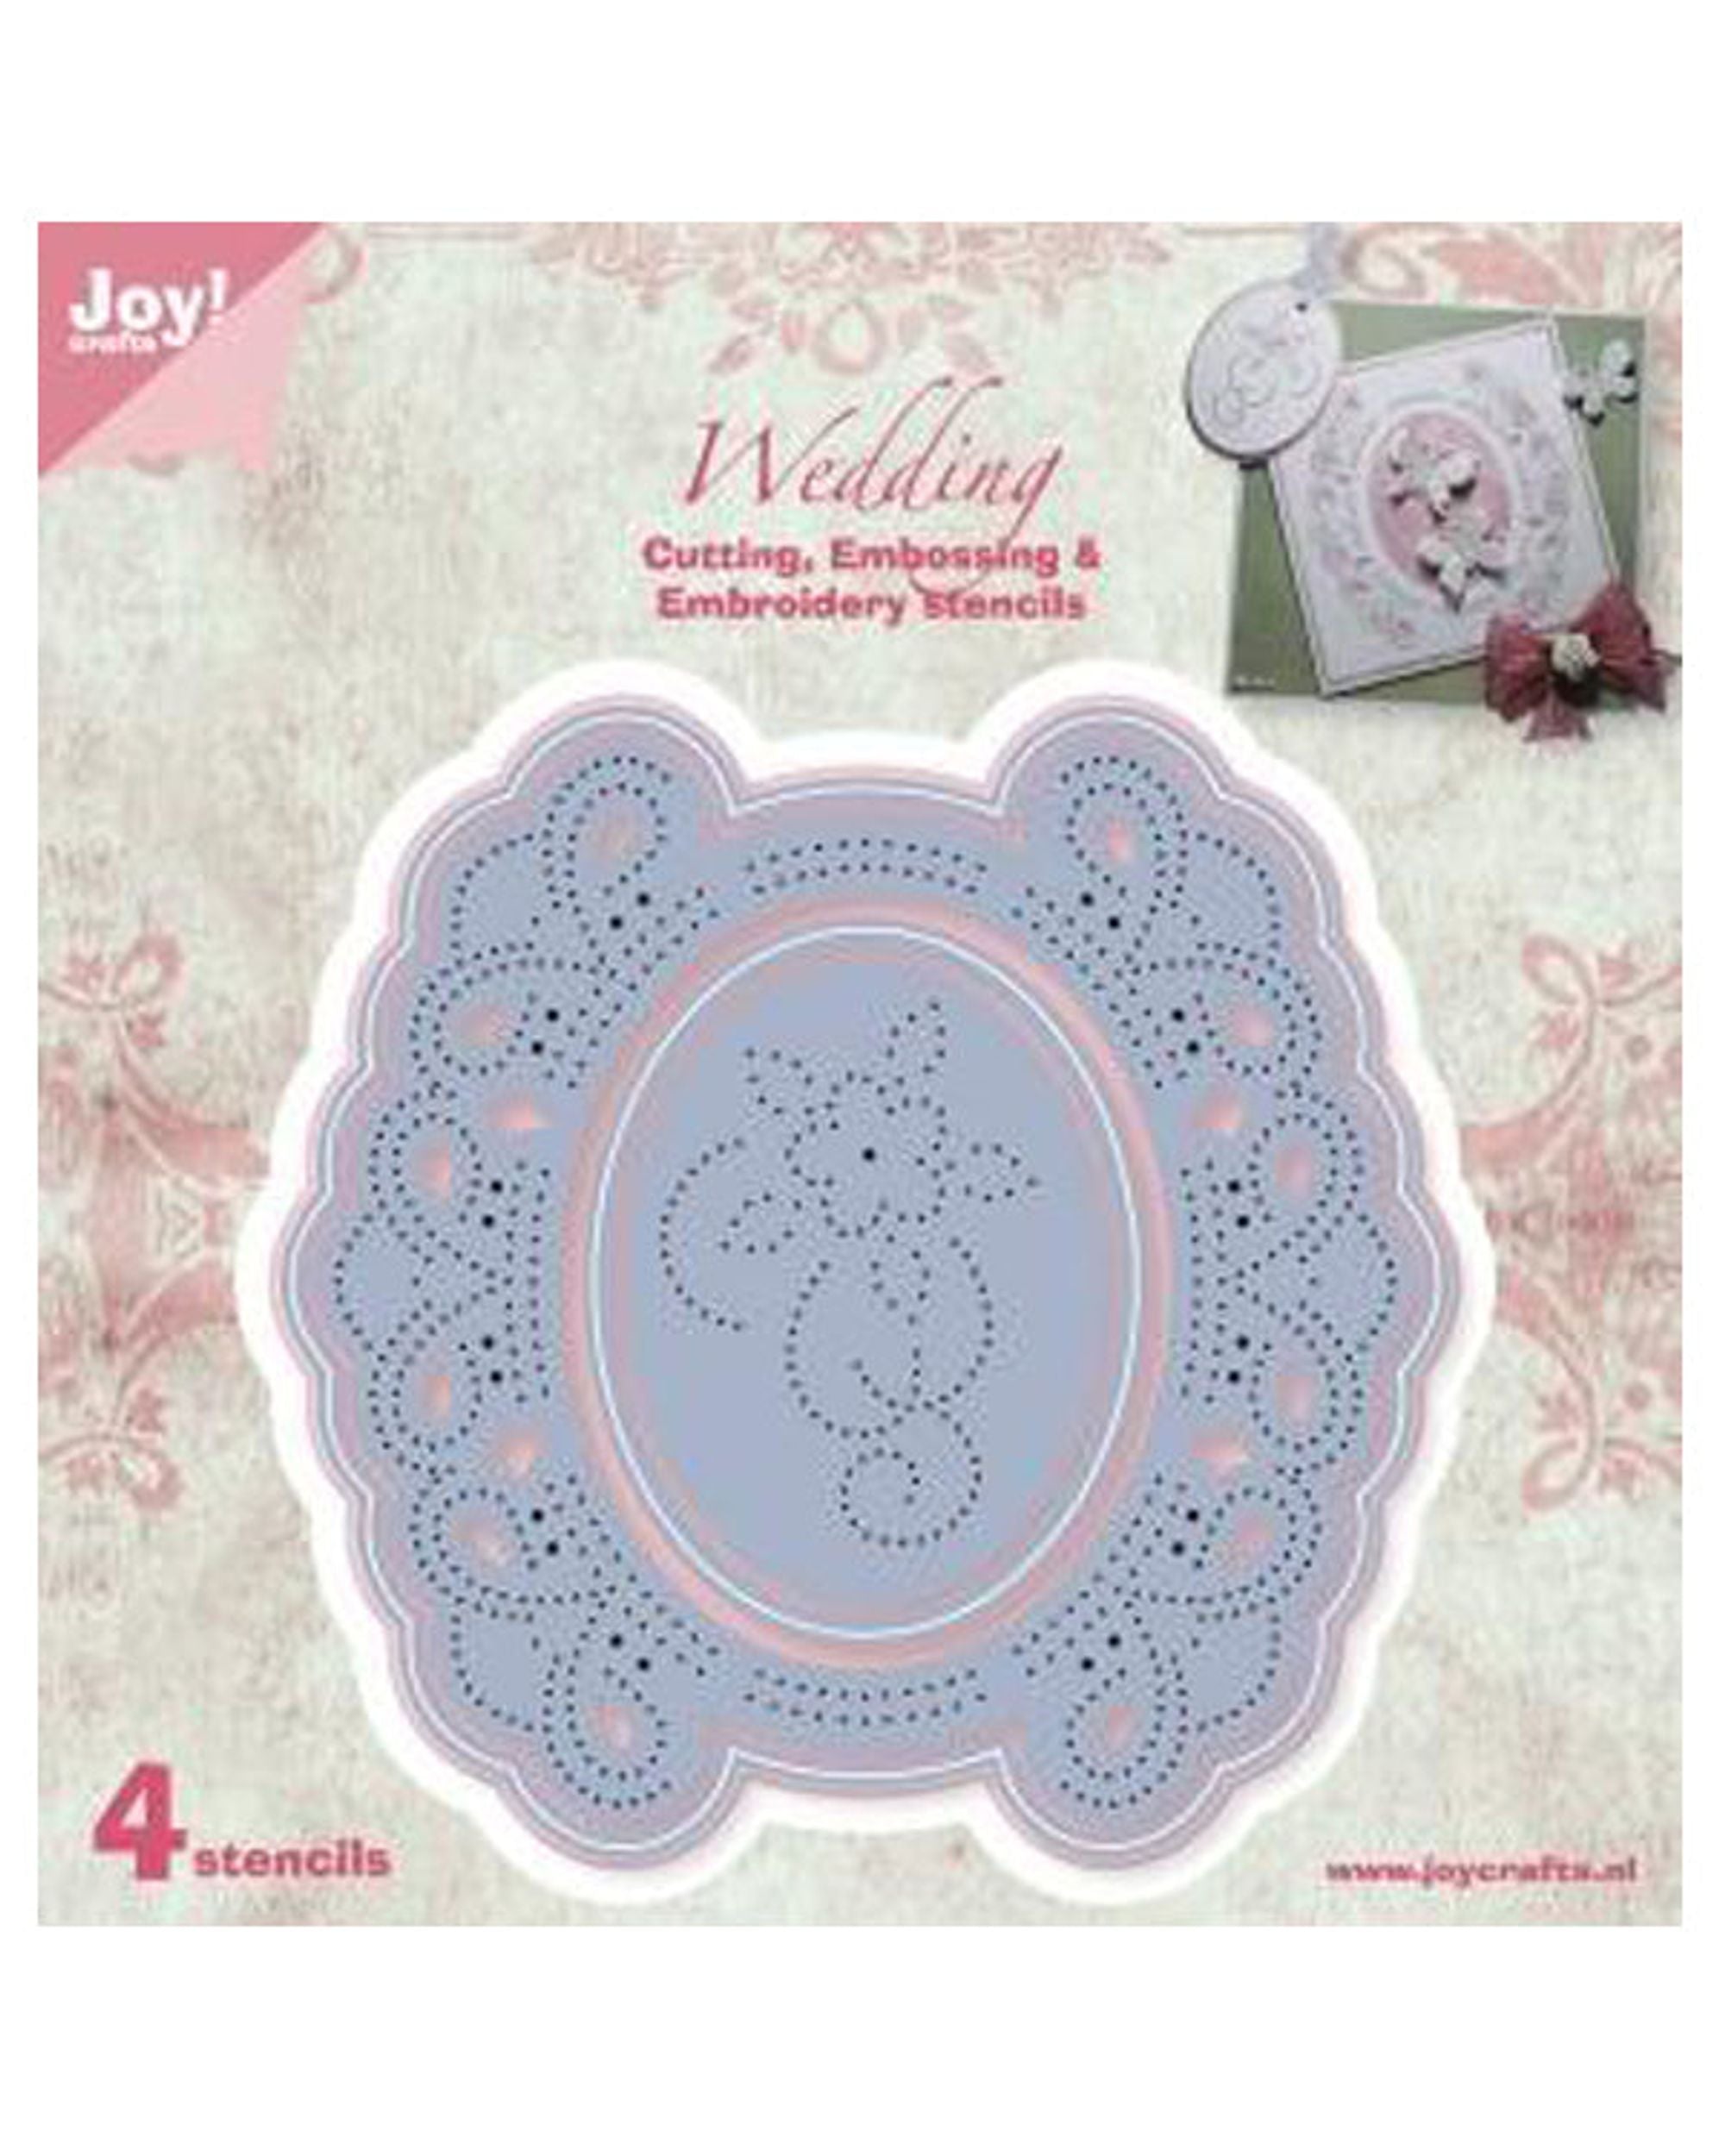 Joy! Crafts Cutting and De-bossing Embroidery Die, Circle Floral Frame